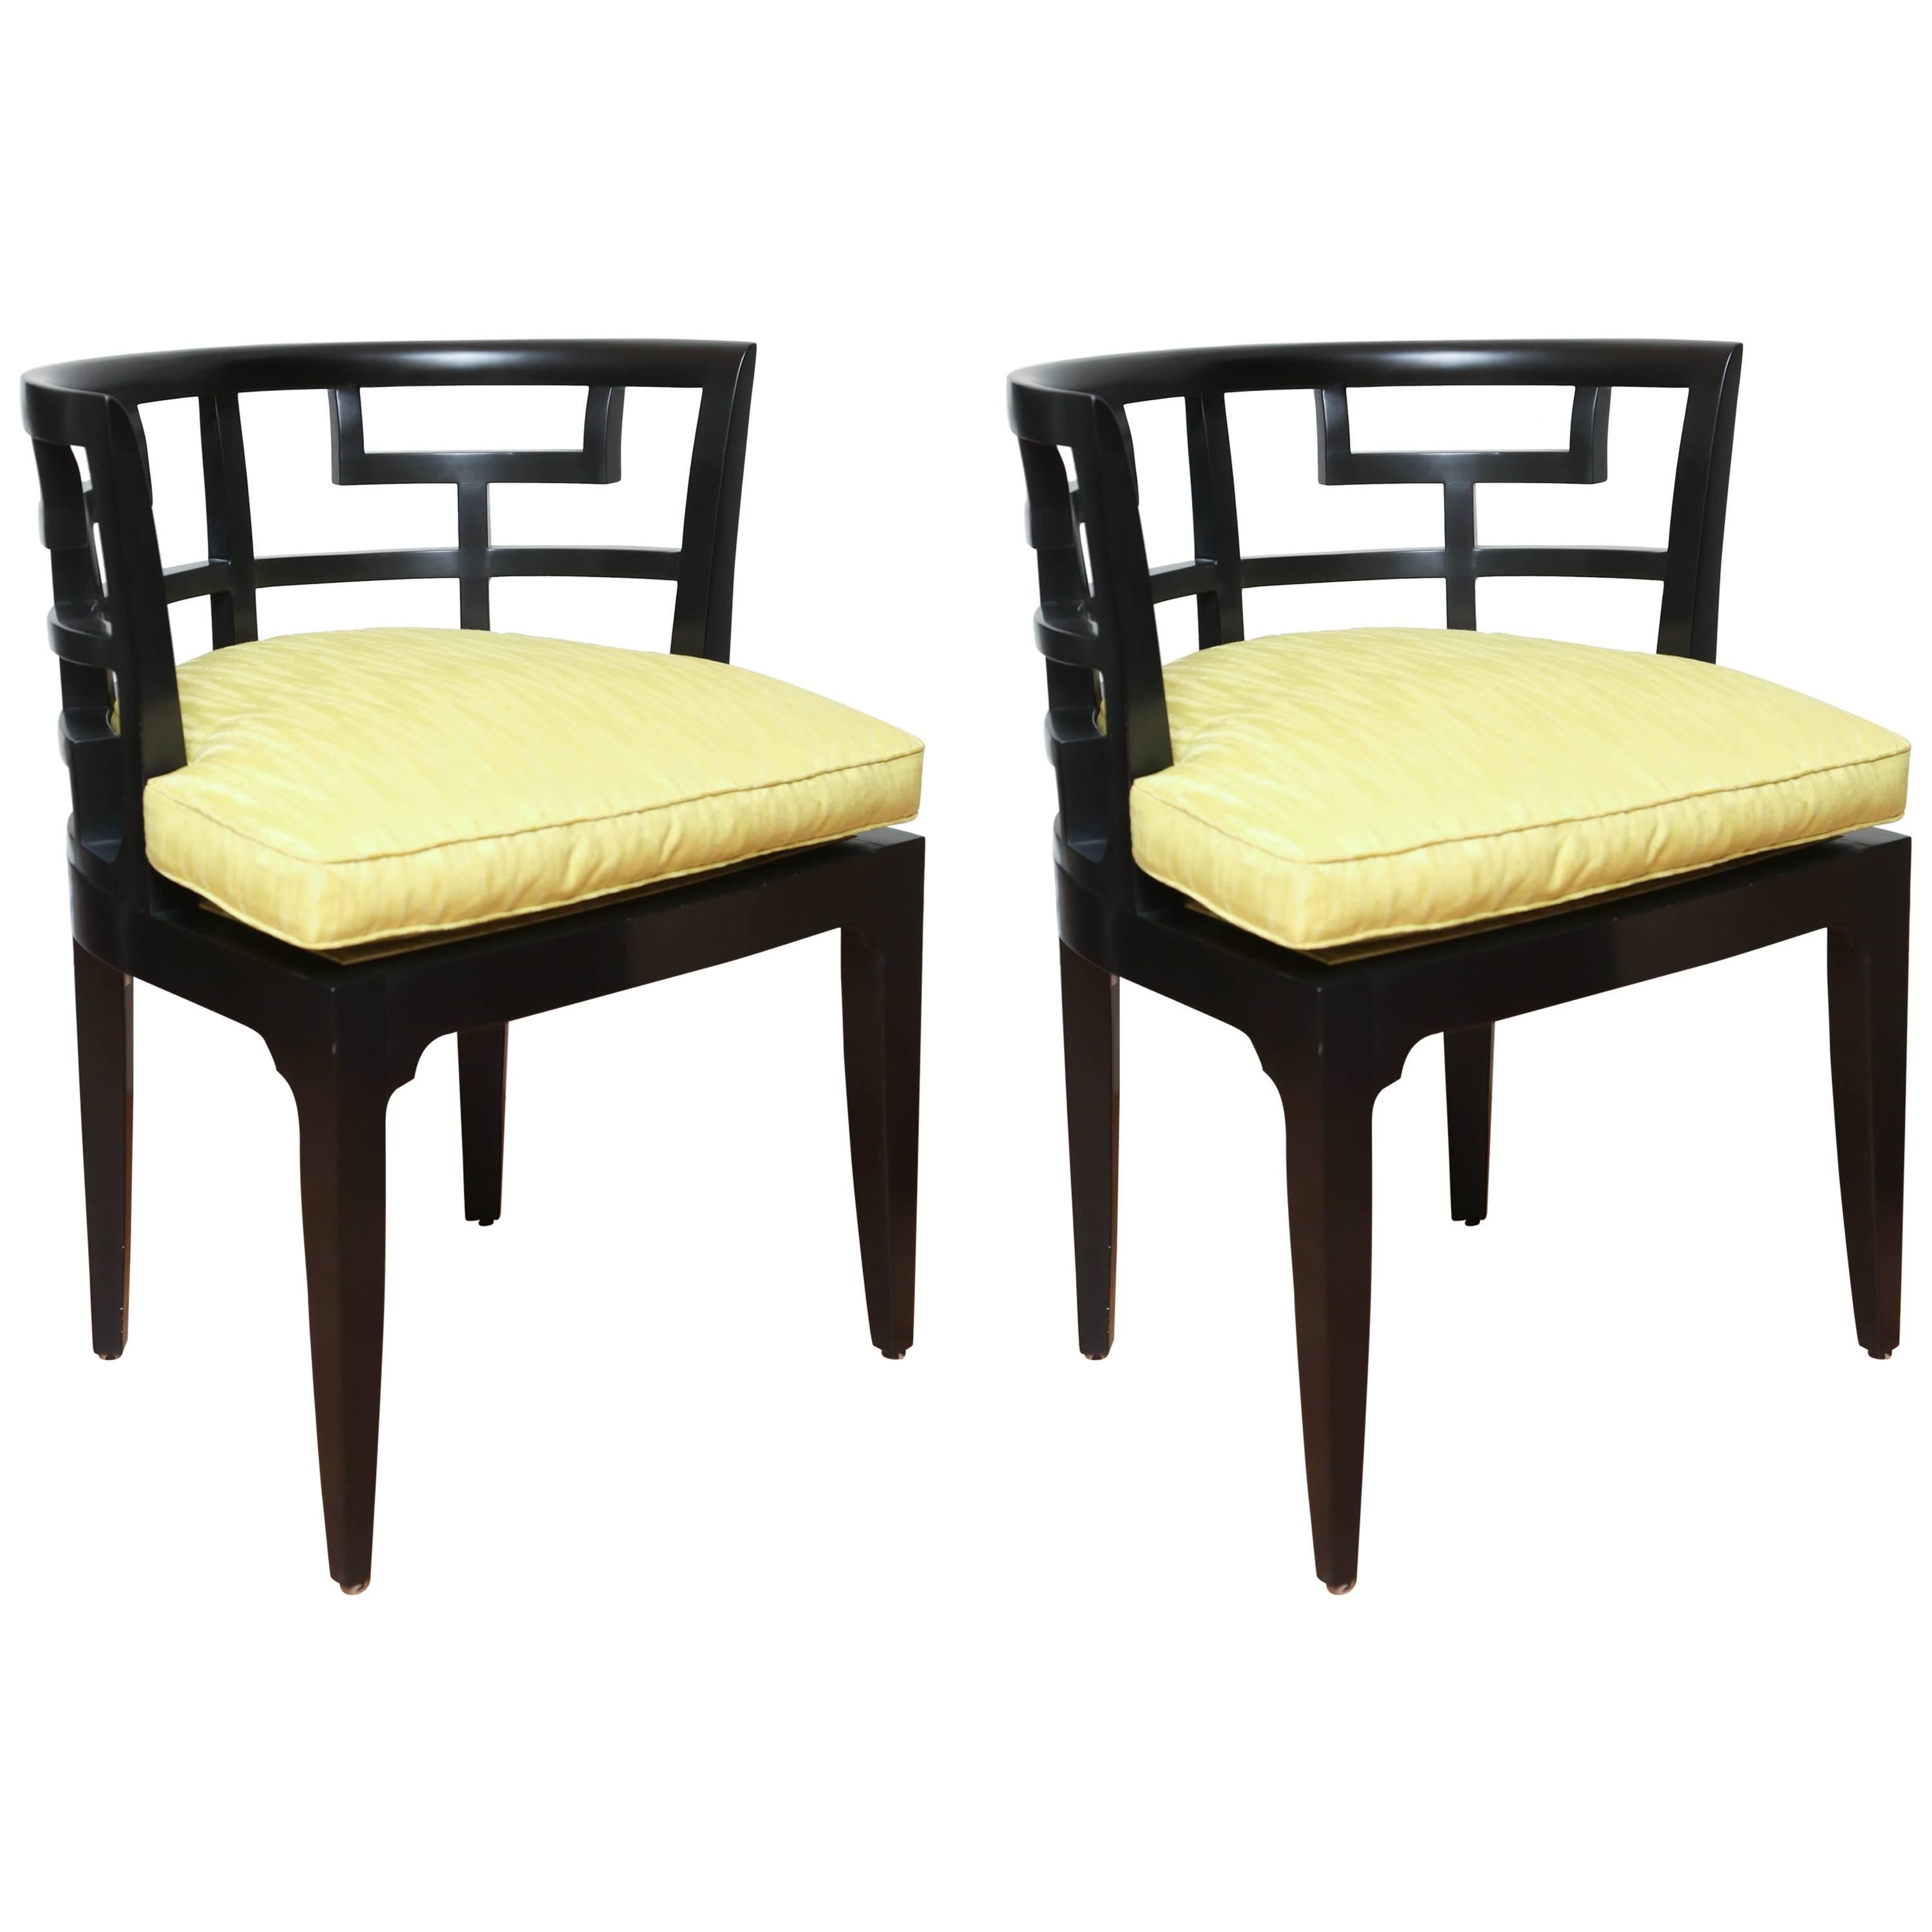 Pair of Slipper Chairs by Edward Ferrell